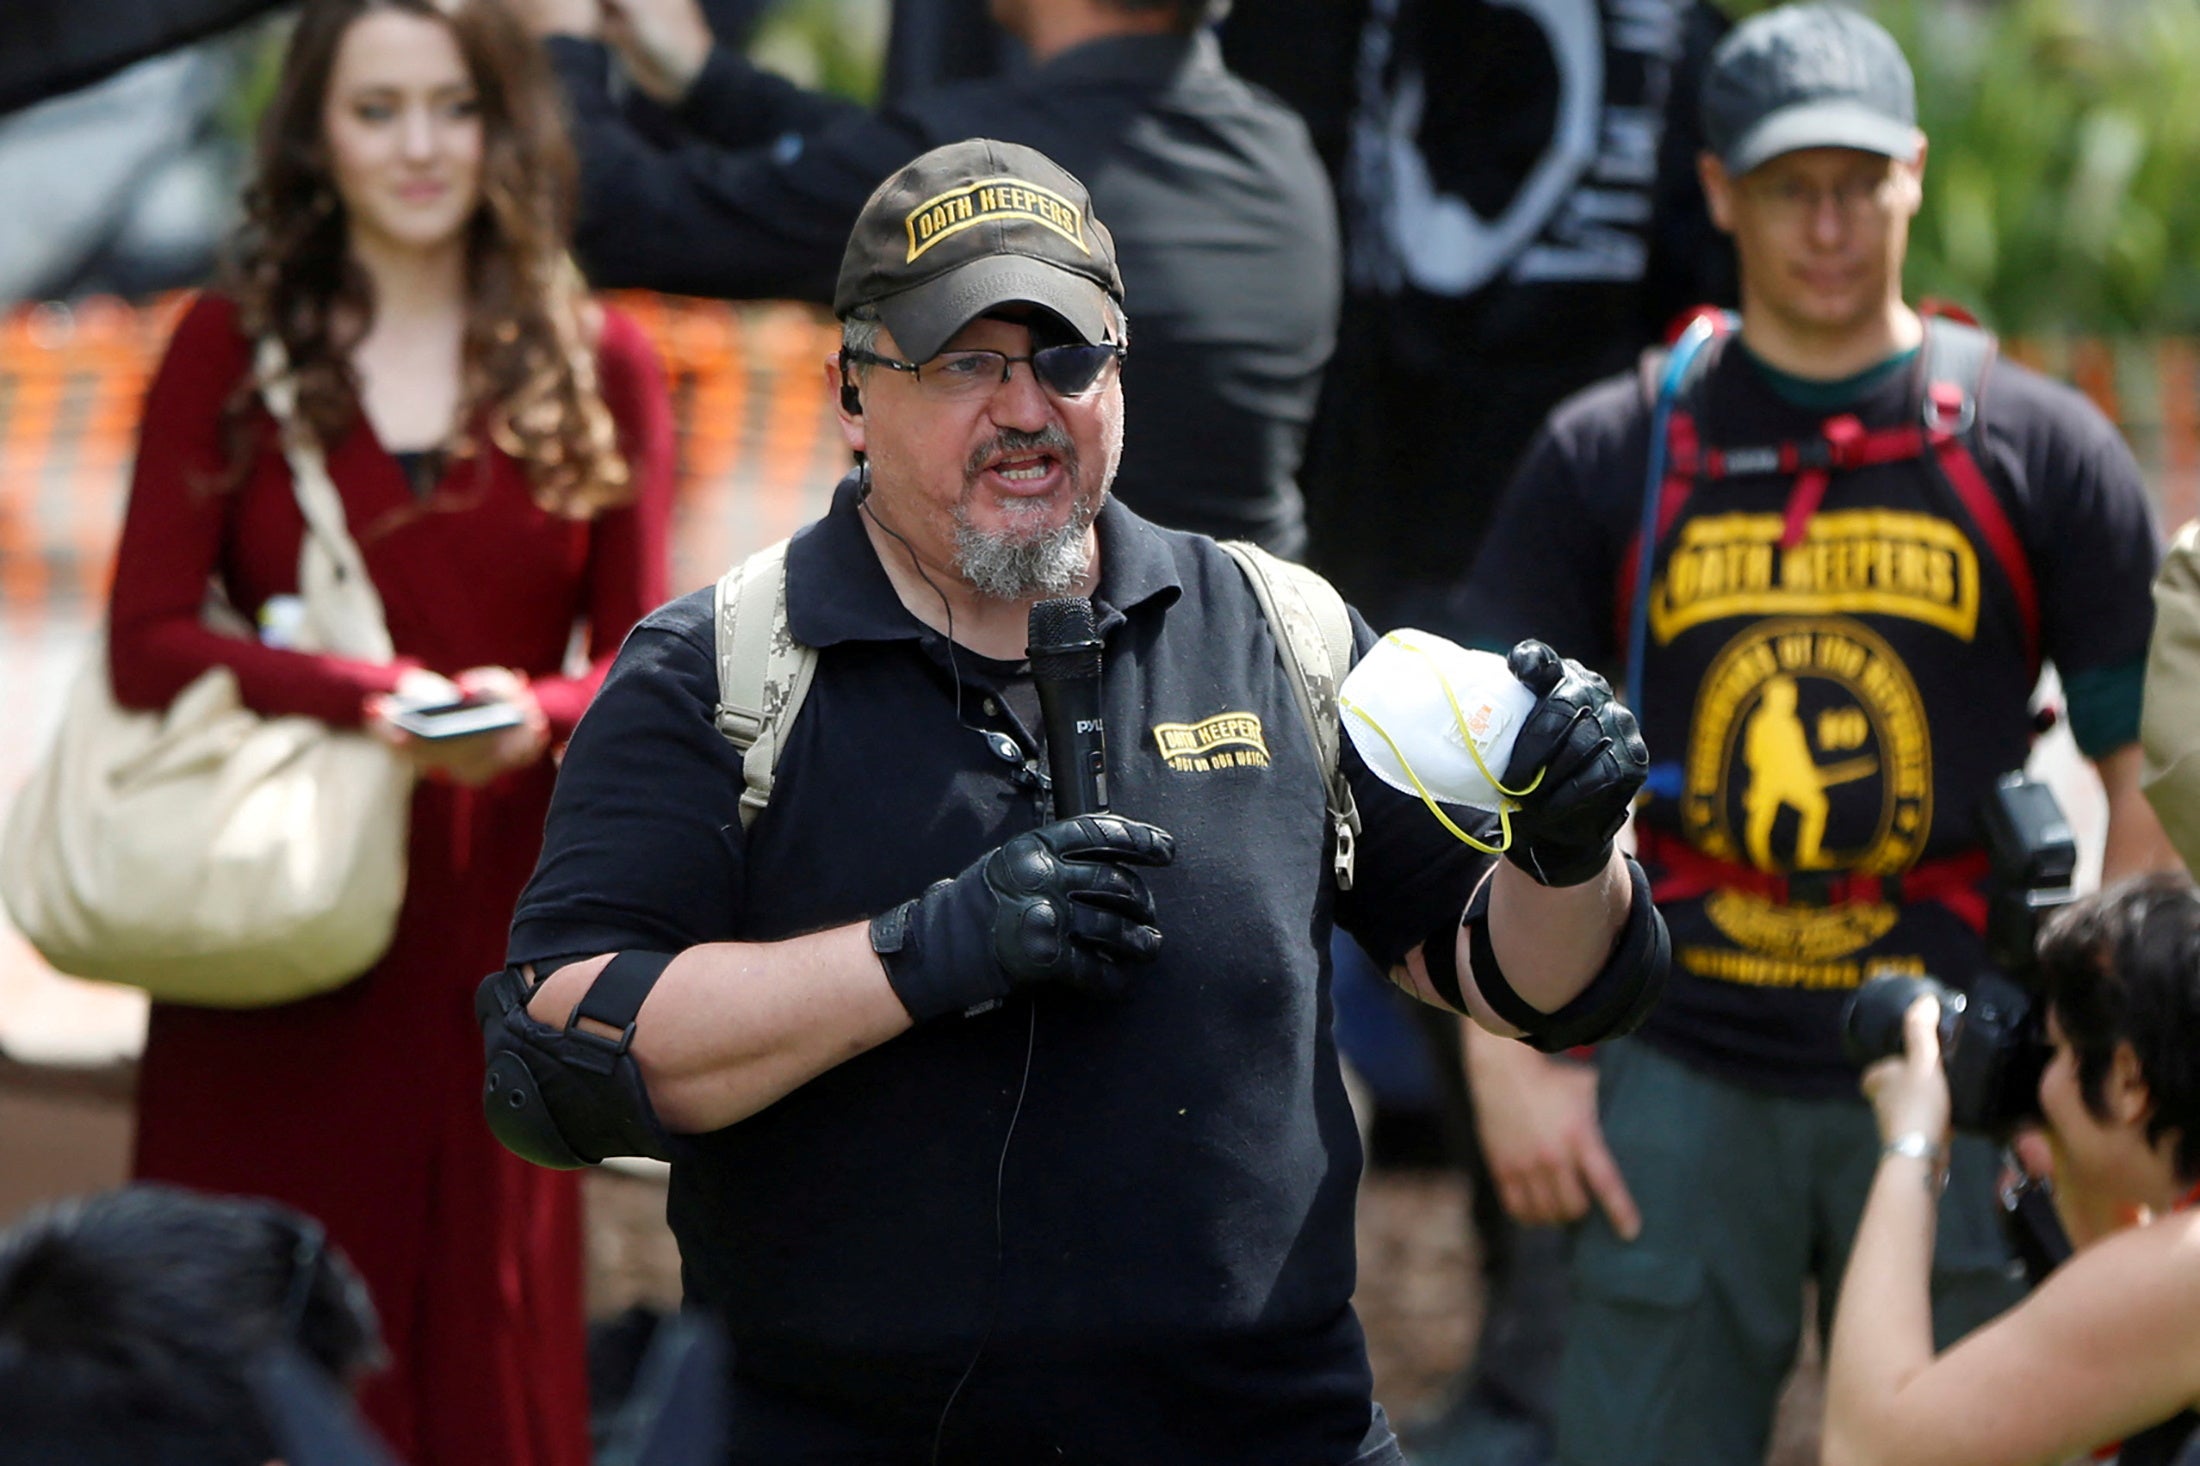 Oath Keepers founder, Stewart Rhodes, speaks during the Patriots Day Free Speech Rally in Berkeley, California, U.S. April 15, 2017. Picture taken April 15, 2017. REUTERS/Jim Urquhart